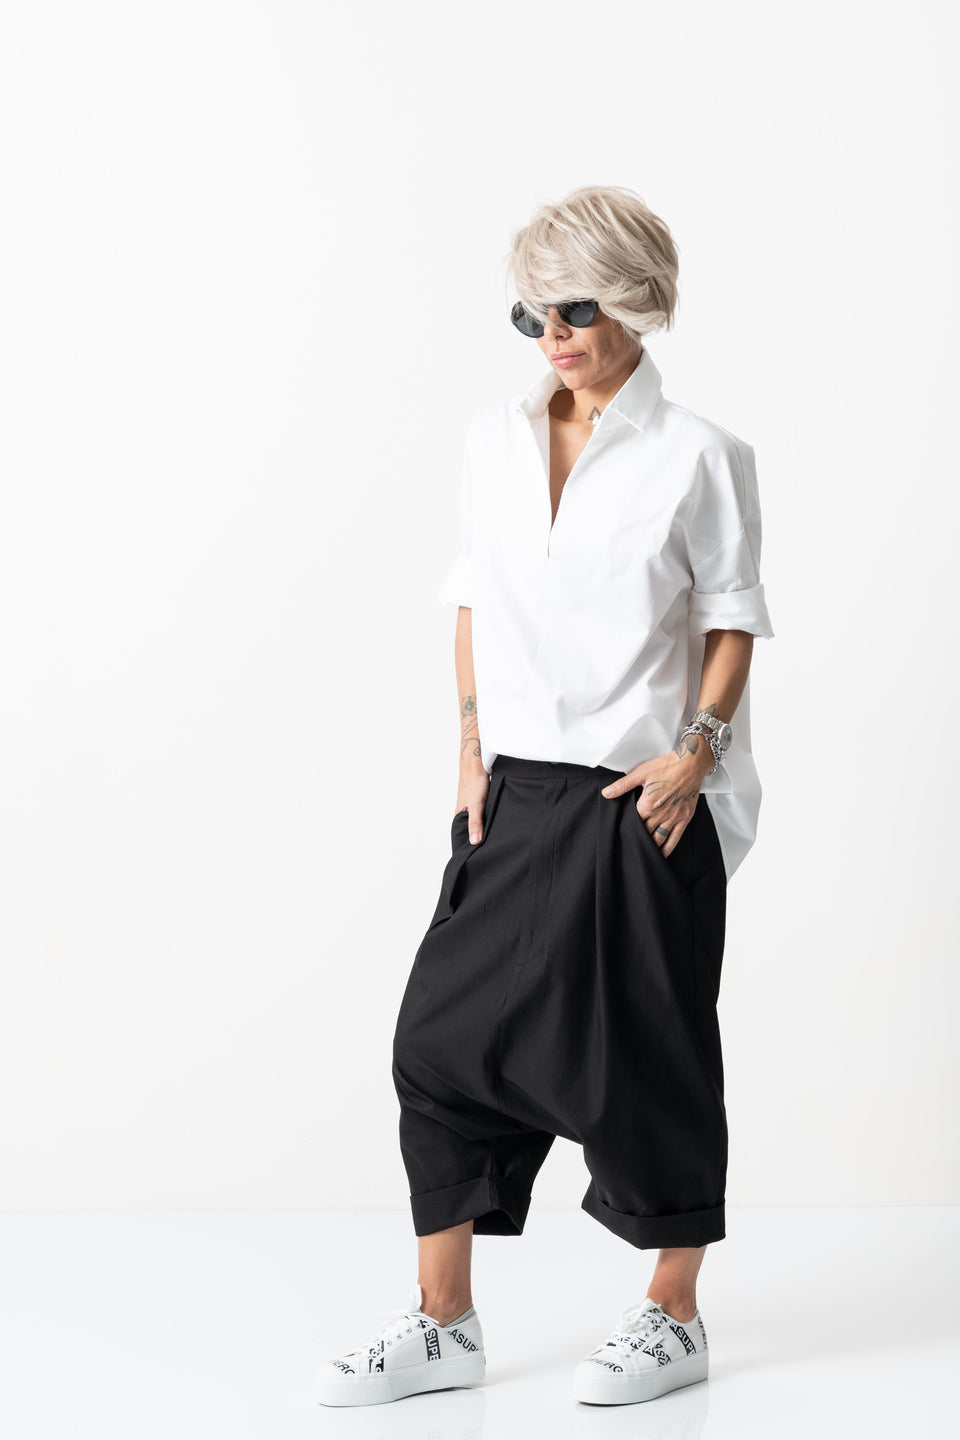 DROP CROTCH TROUSERS + WHITE SHIRT OUTFIT SET